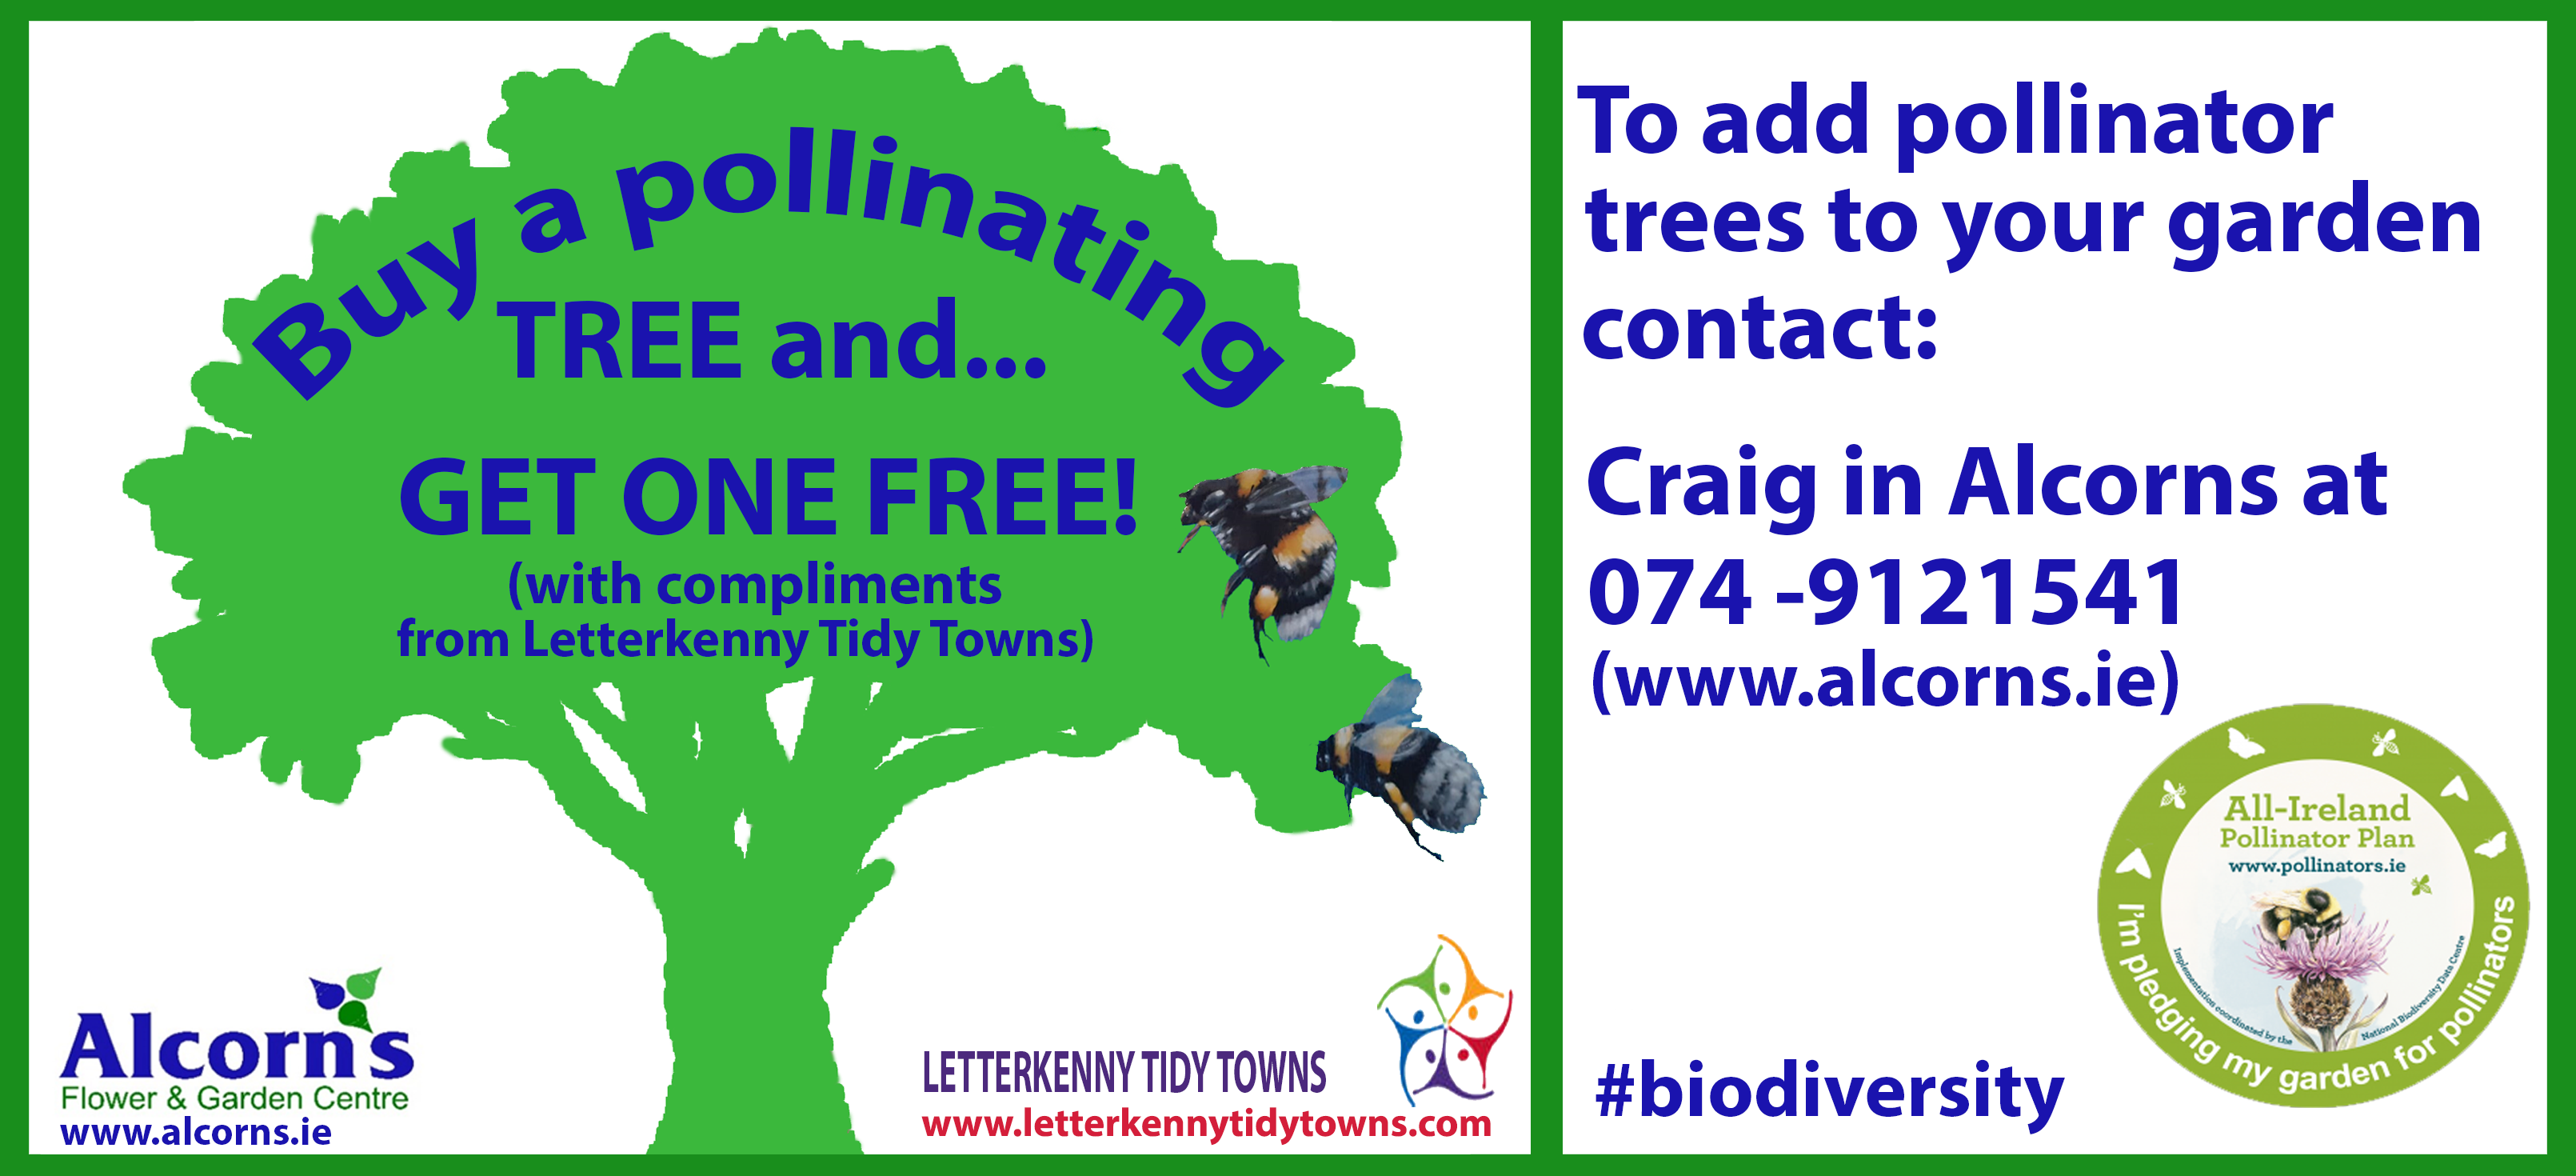 Pollinator Friendly Areas Register – Buy a Pollinator Friendly Tree & Get Another Free Campaign – NOW CLOSED